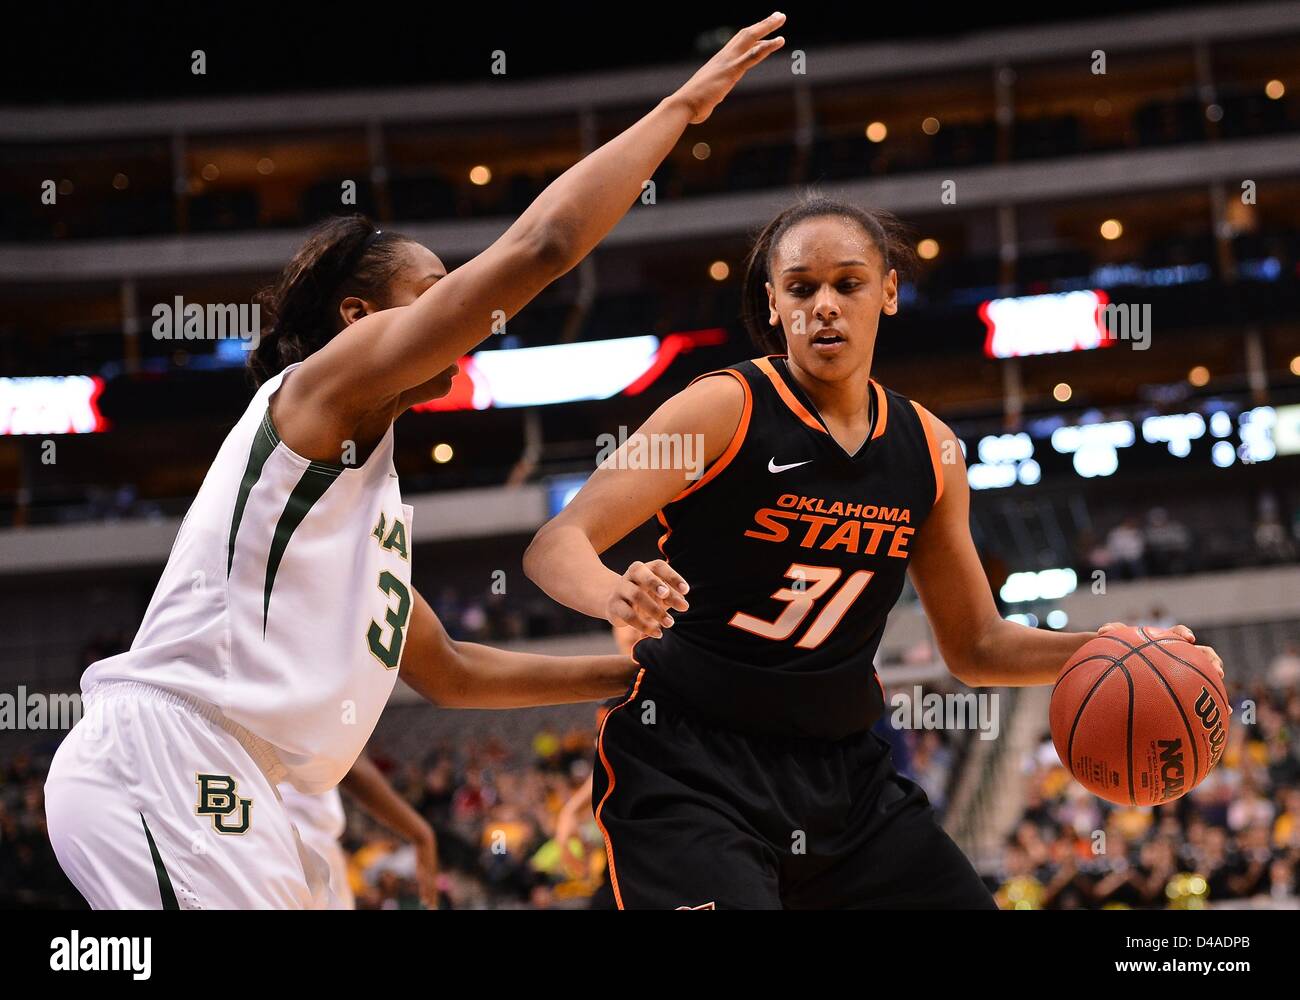 March 10, 2013 - Dallas, TX, United States of America - March 10, 2013..Oklahoma State center Kendra Suttles #31 and Baylor guard Jordan Madden #3 during BIG 12 Women's Basketball Championship semifinal game at American Airline Center in Dallas, TX. Baylor defeat Oklahoma State 77-69 to advance to the final. Stock Photo